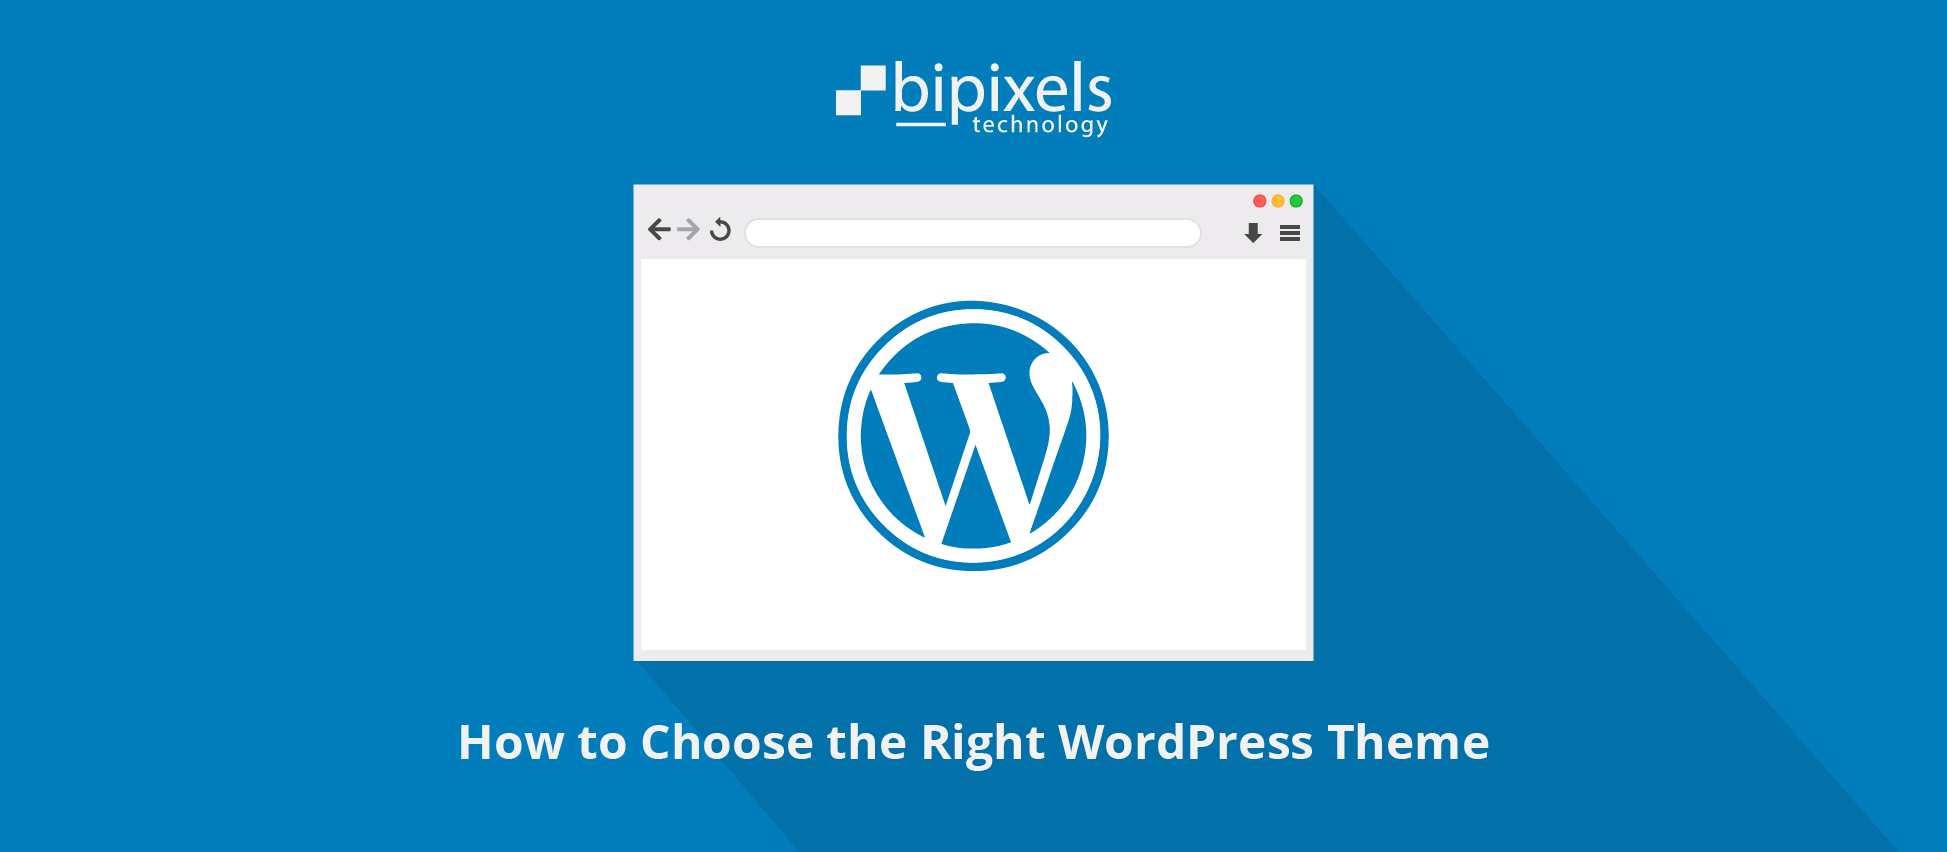 How to Choose the Right WordPress Theme